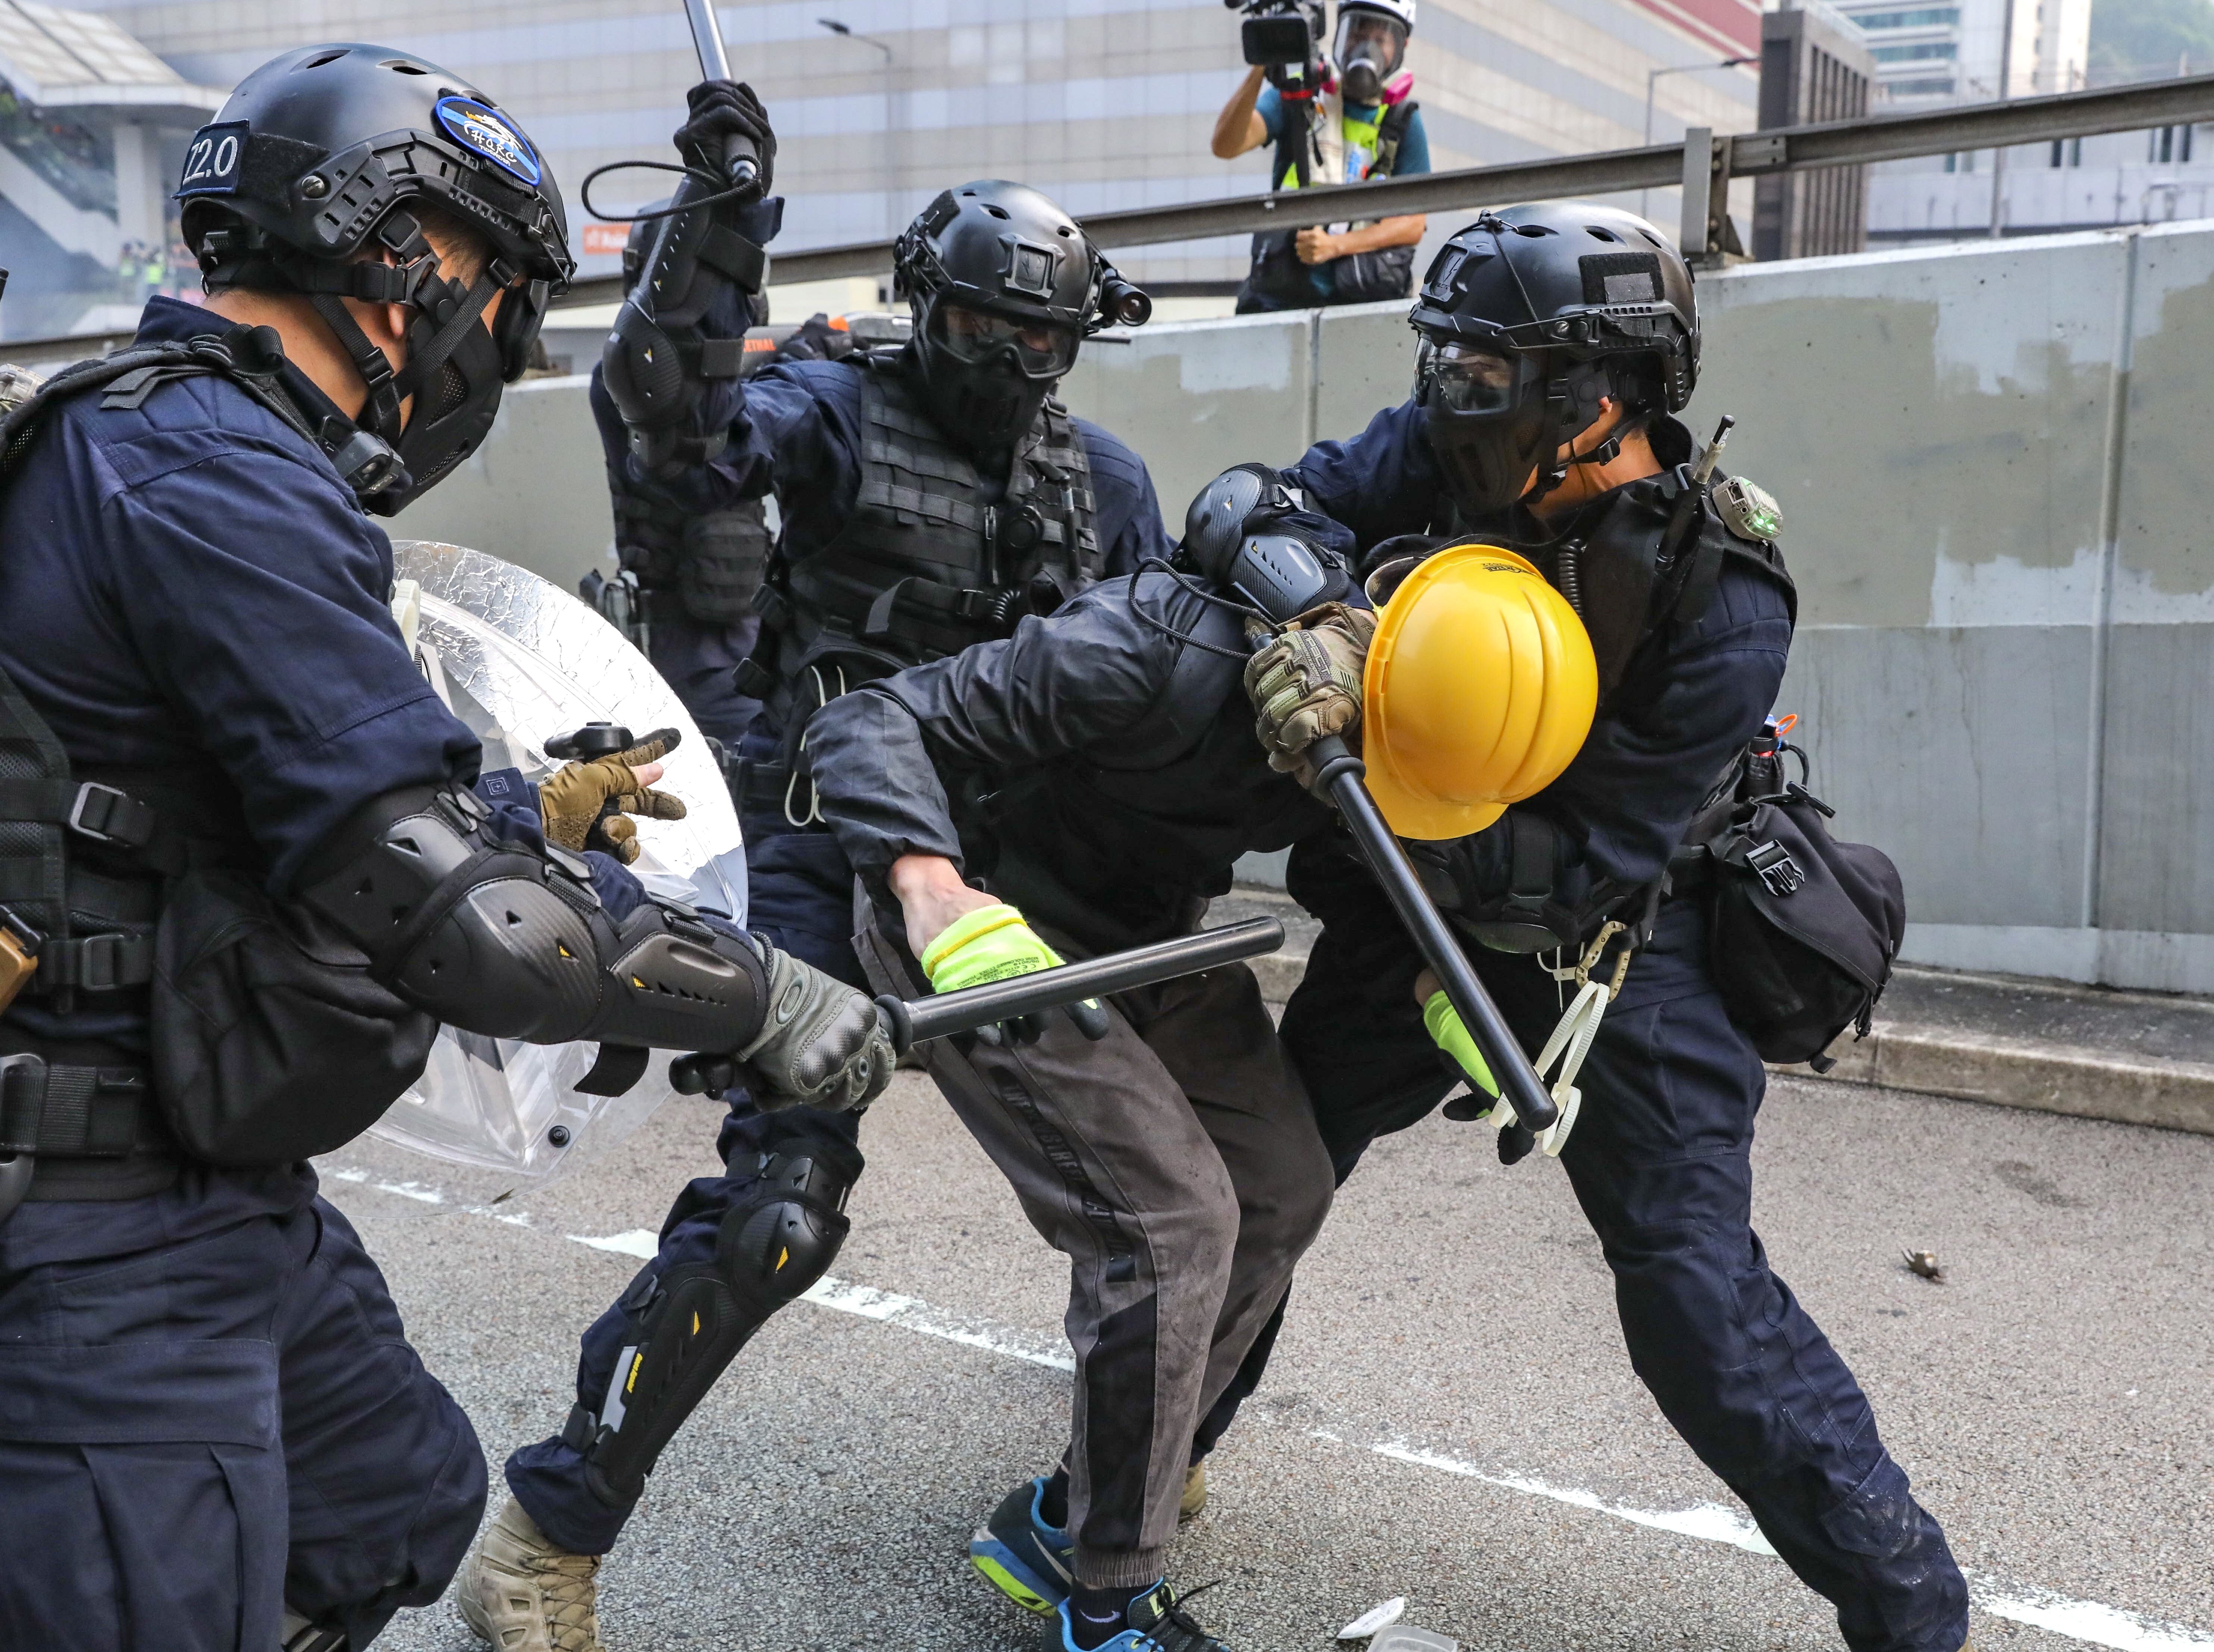 Hong Kong riot police arrest protesters following clashes during an anti-extradition bill march in September. Photo: K.Y. Cheng